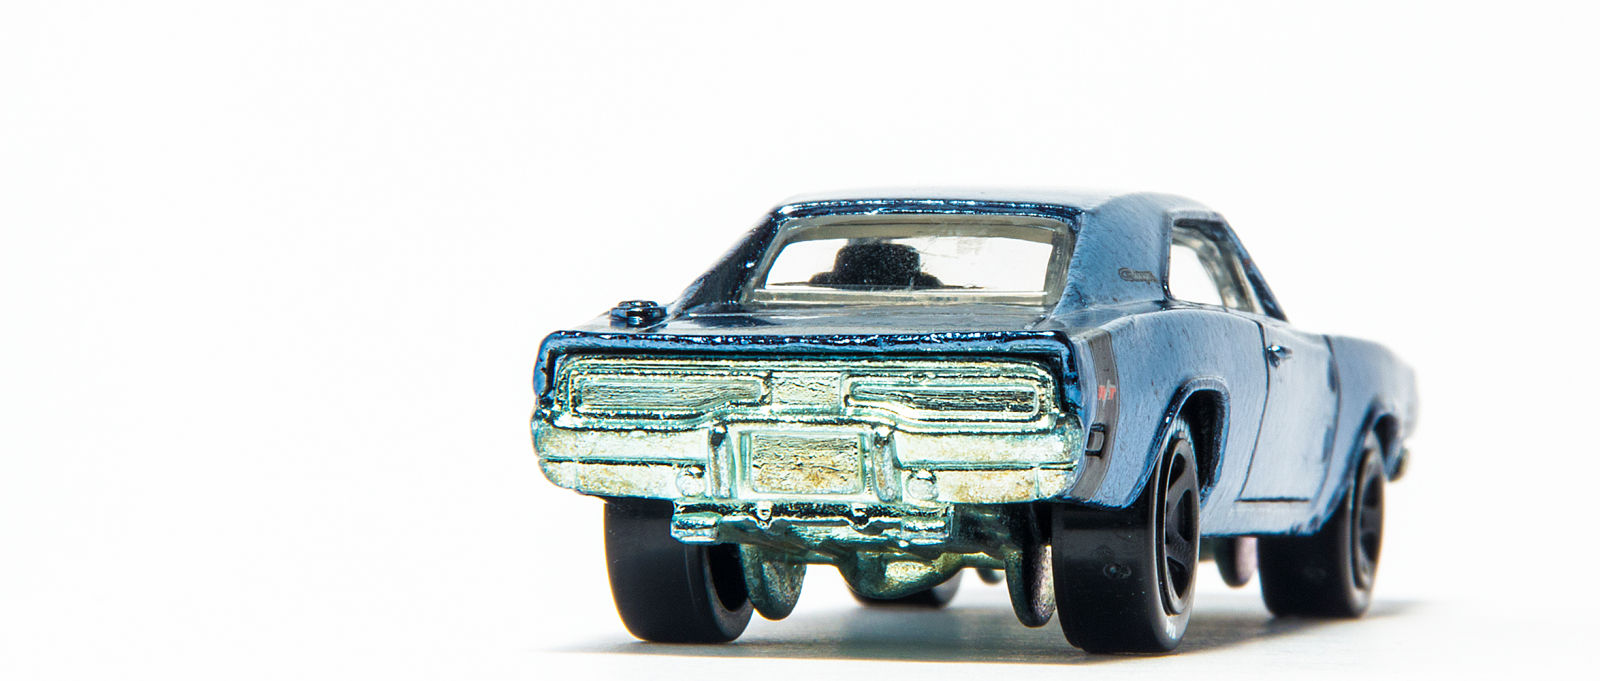 Illustration for article titled MoPar Monday - Classics Series Charger